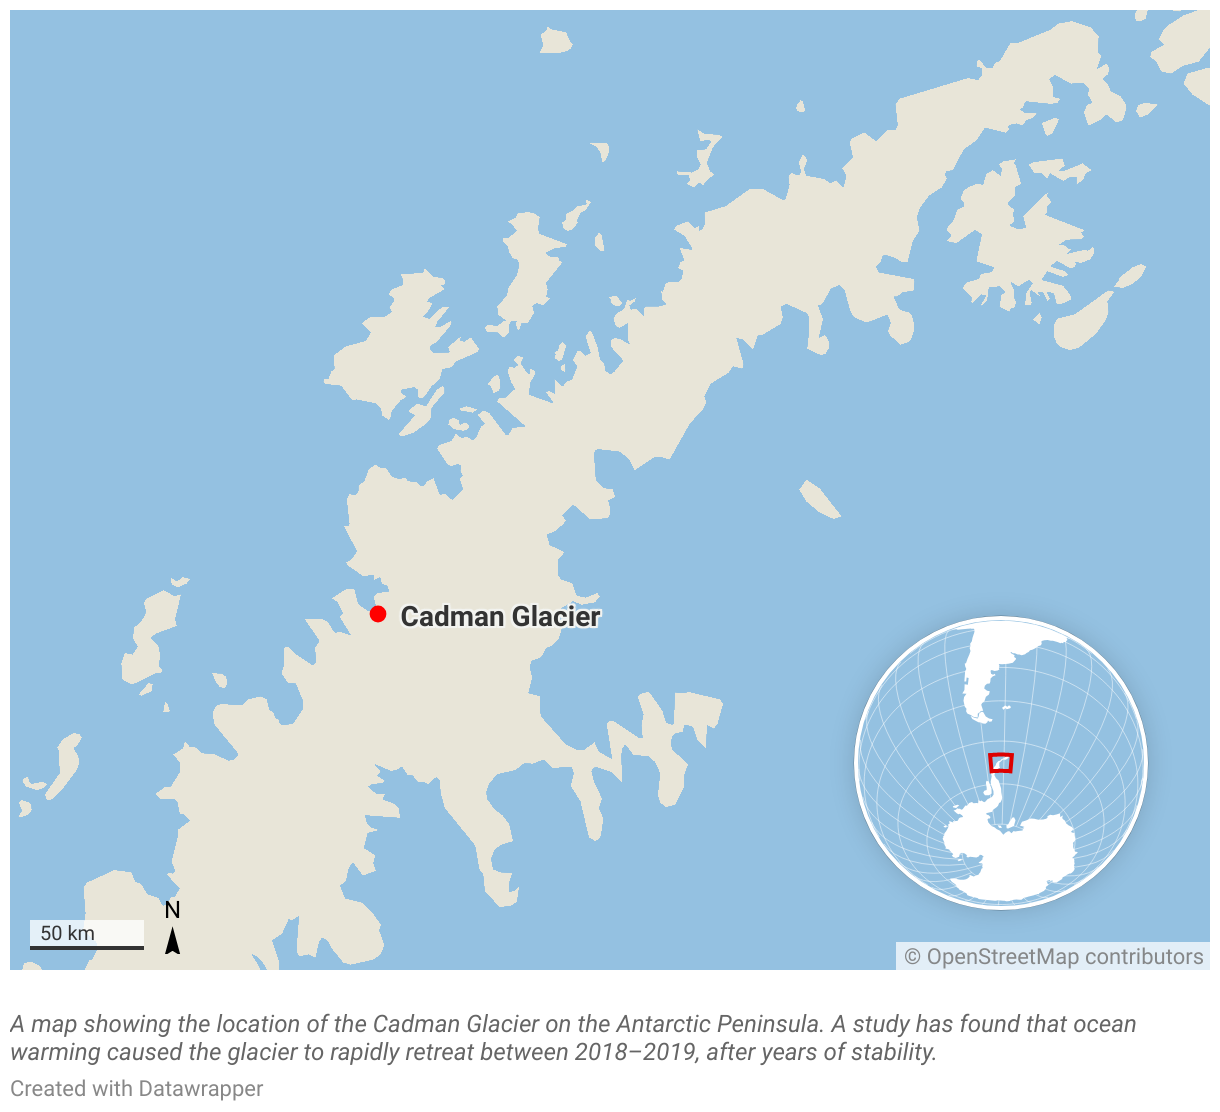 A map showing the location of the Cadman Glacier on the Antarctic Peninsula.